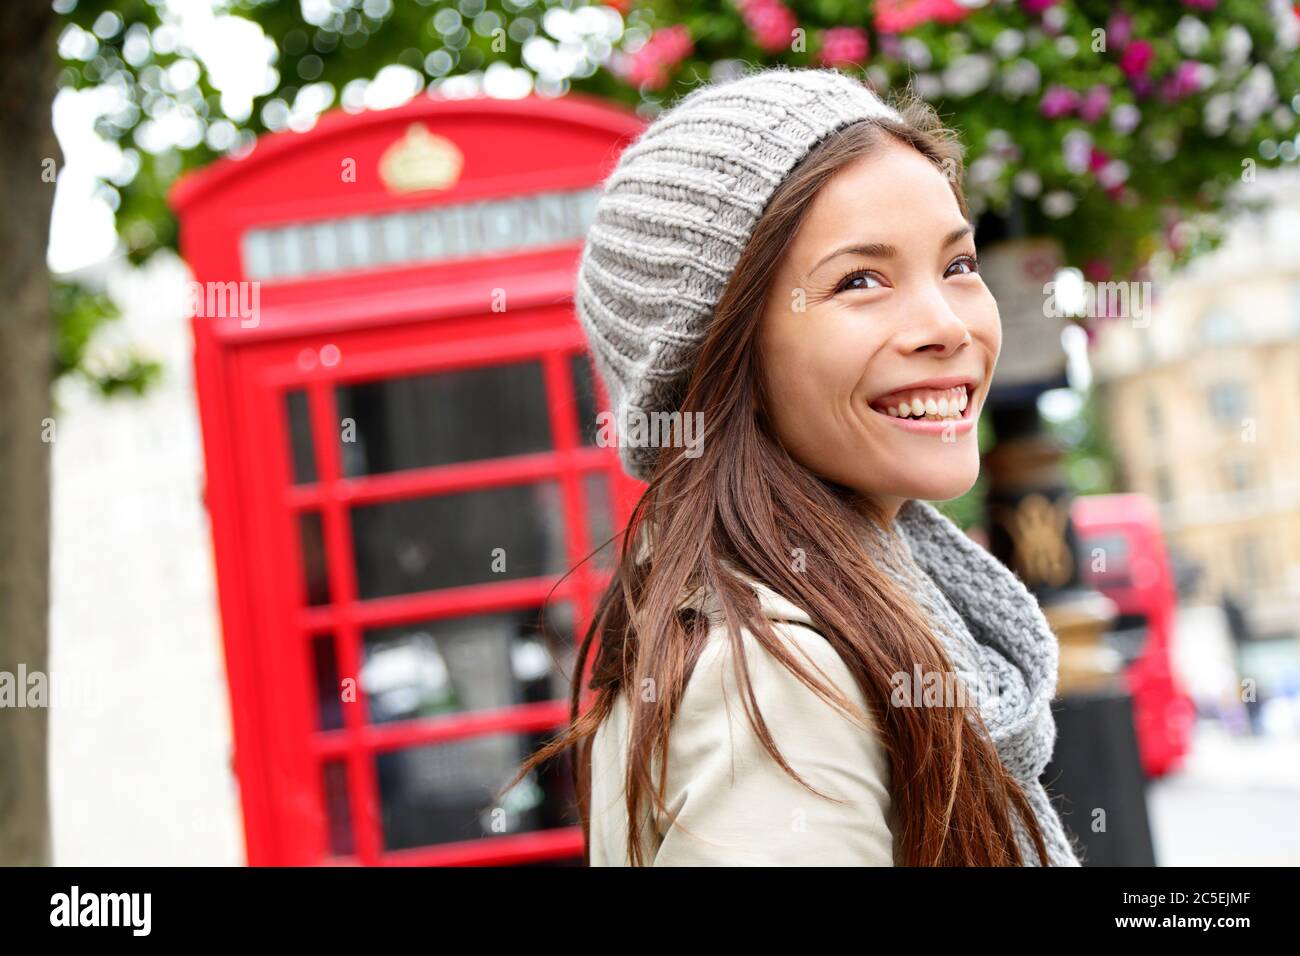 London people - woman by red phone booth Stock Photo